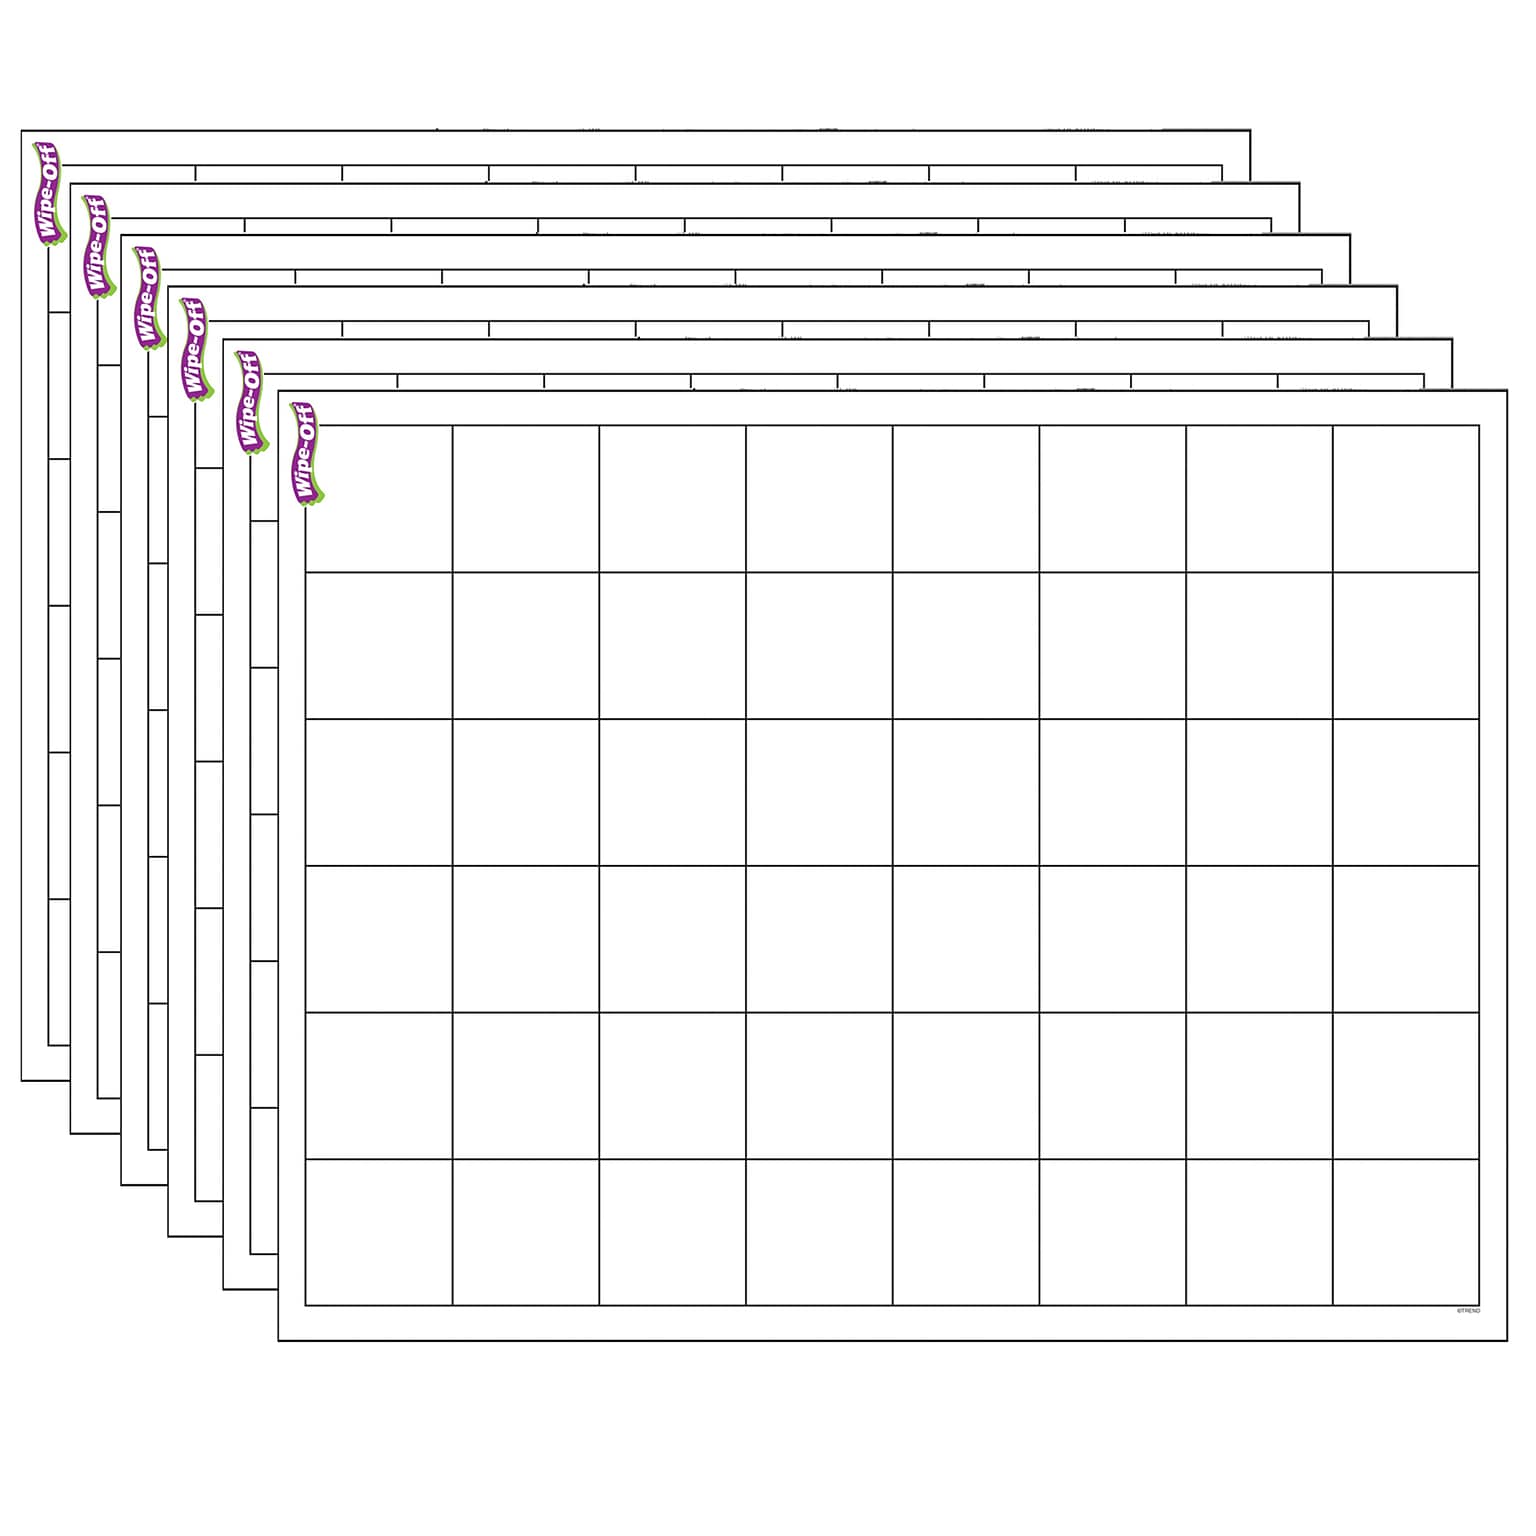 TREND Graphing Grid (Large Squares) Wipe-Off Chart, 17 x 22, Pack of 6 (T-27306-6)